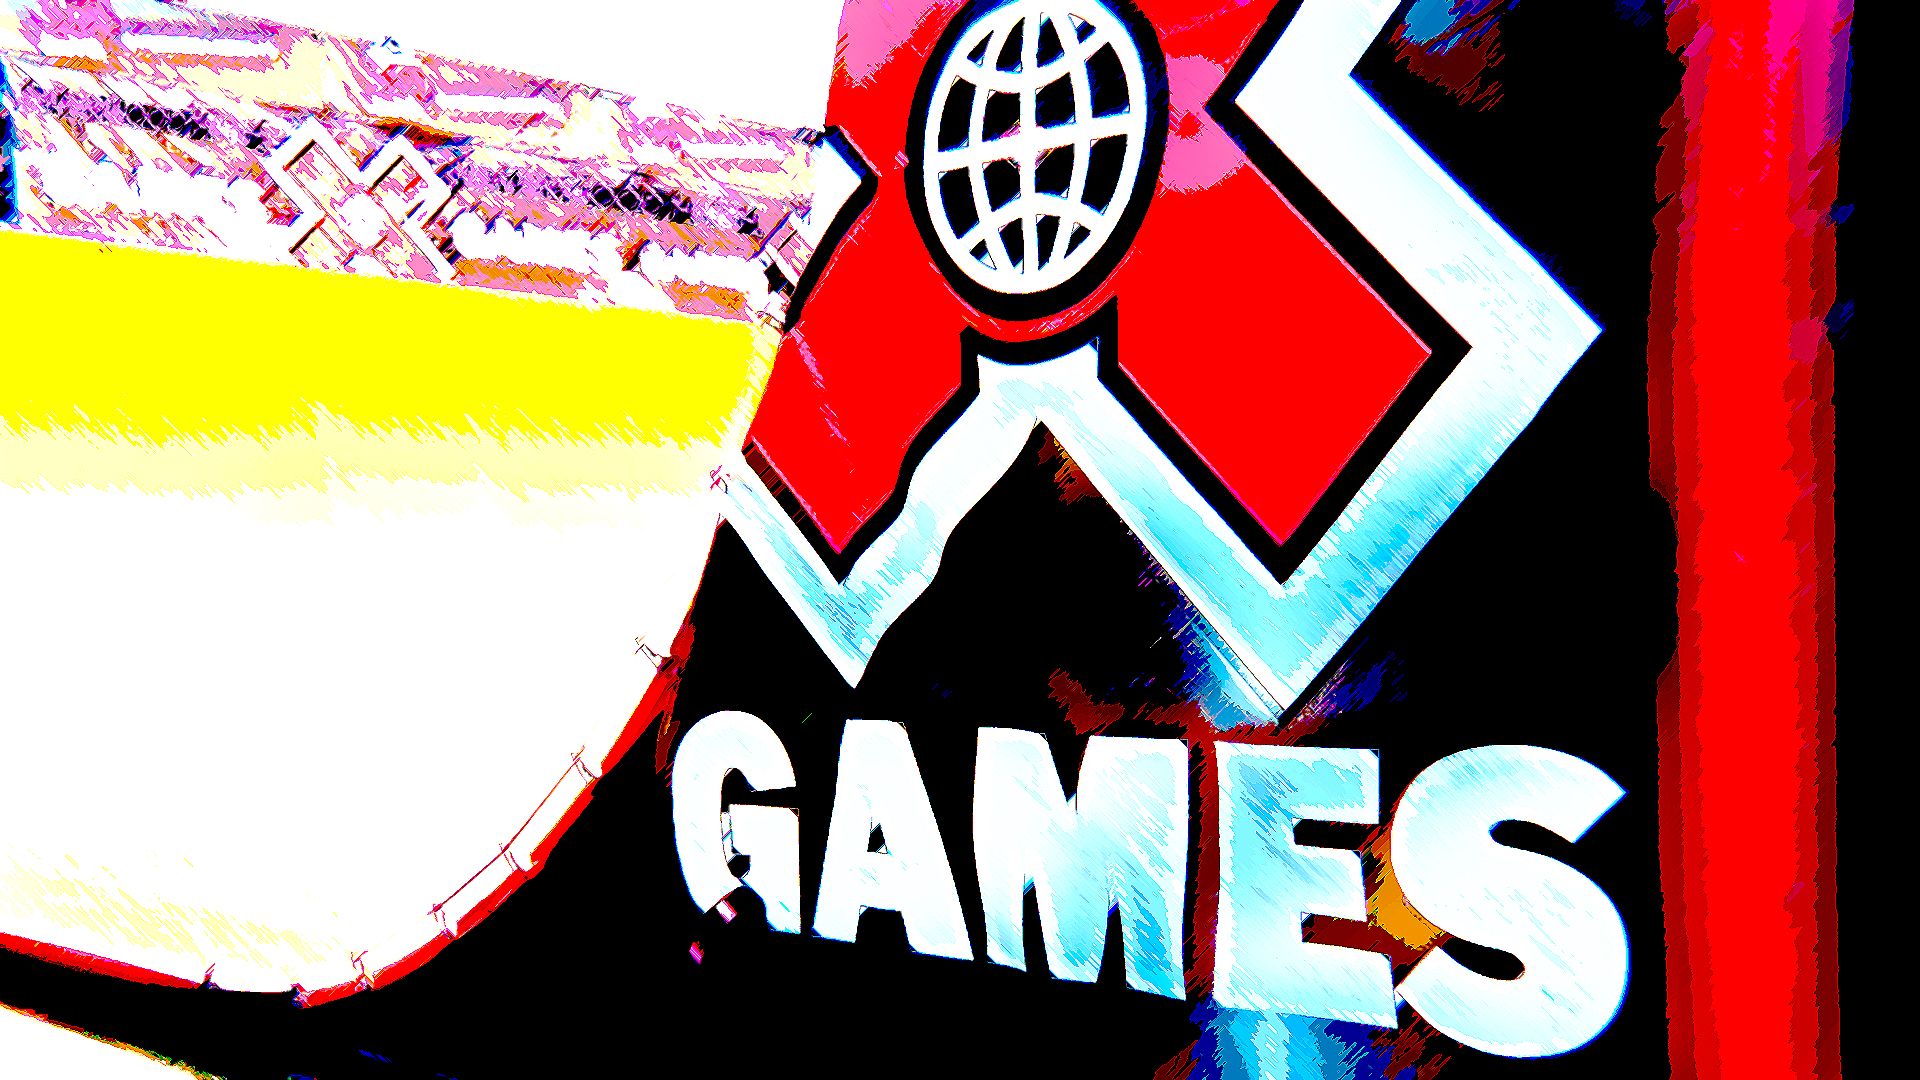 S x games. X games. Xgame. X-game НН. Wallpaper Posted by Foster Robert.